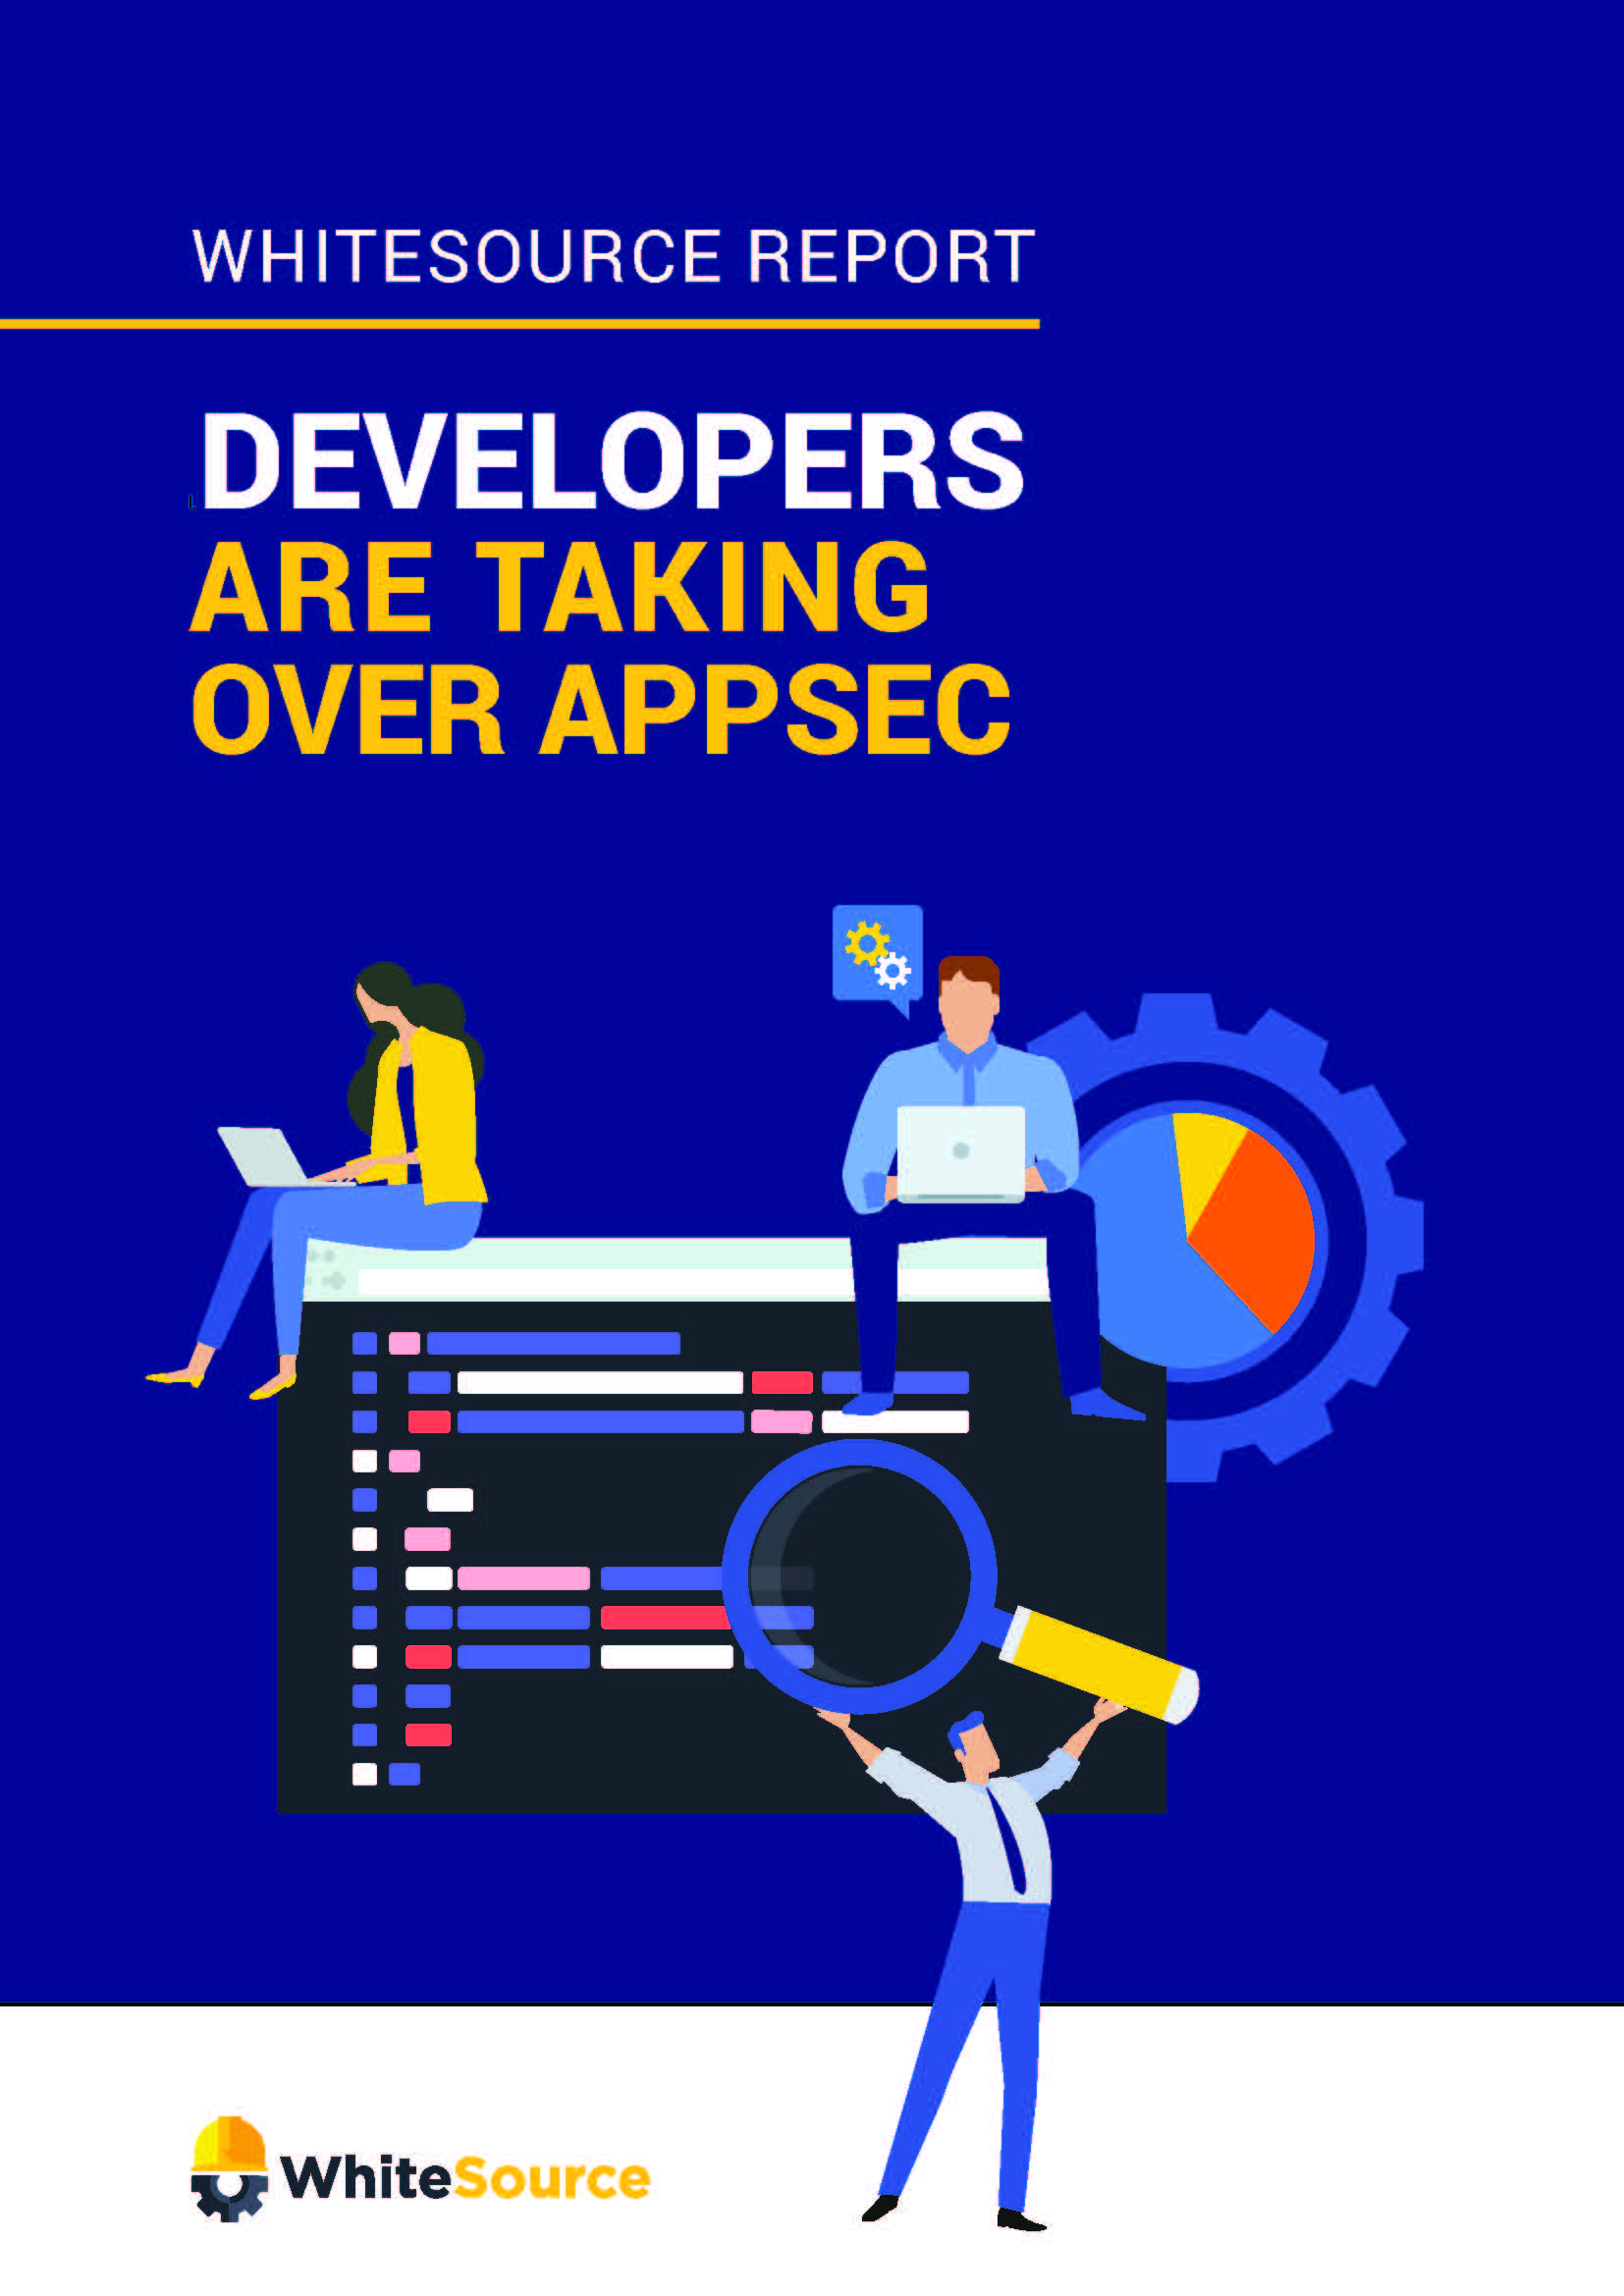 whitesource-report-developers-are-taking-over-appsec (1)_Page_1